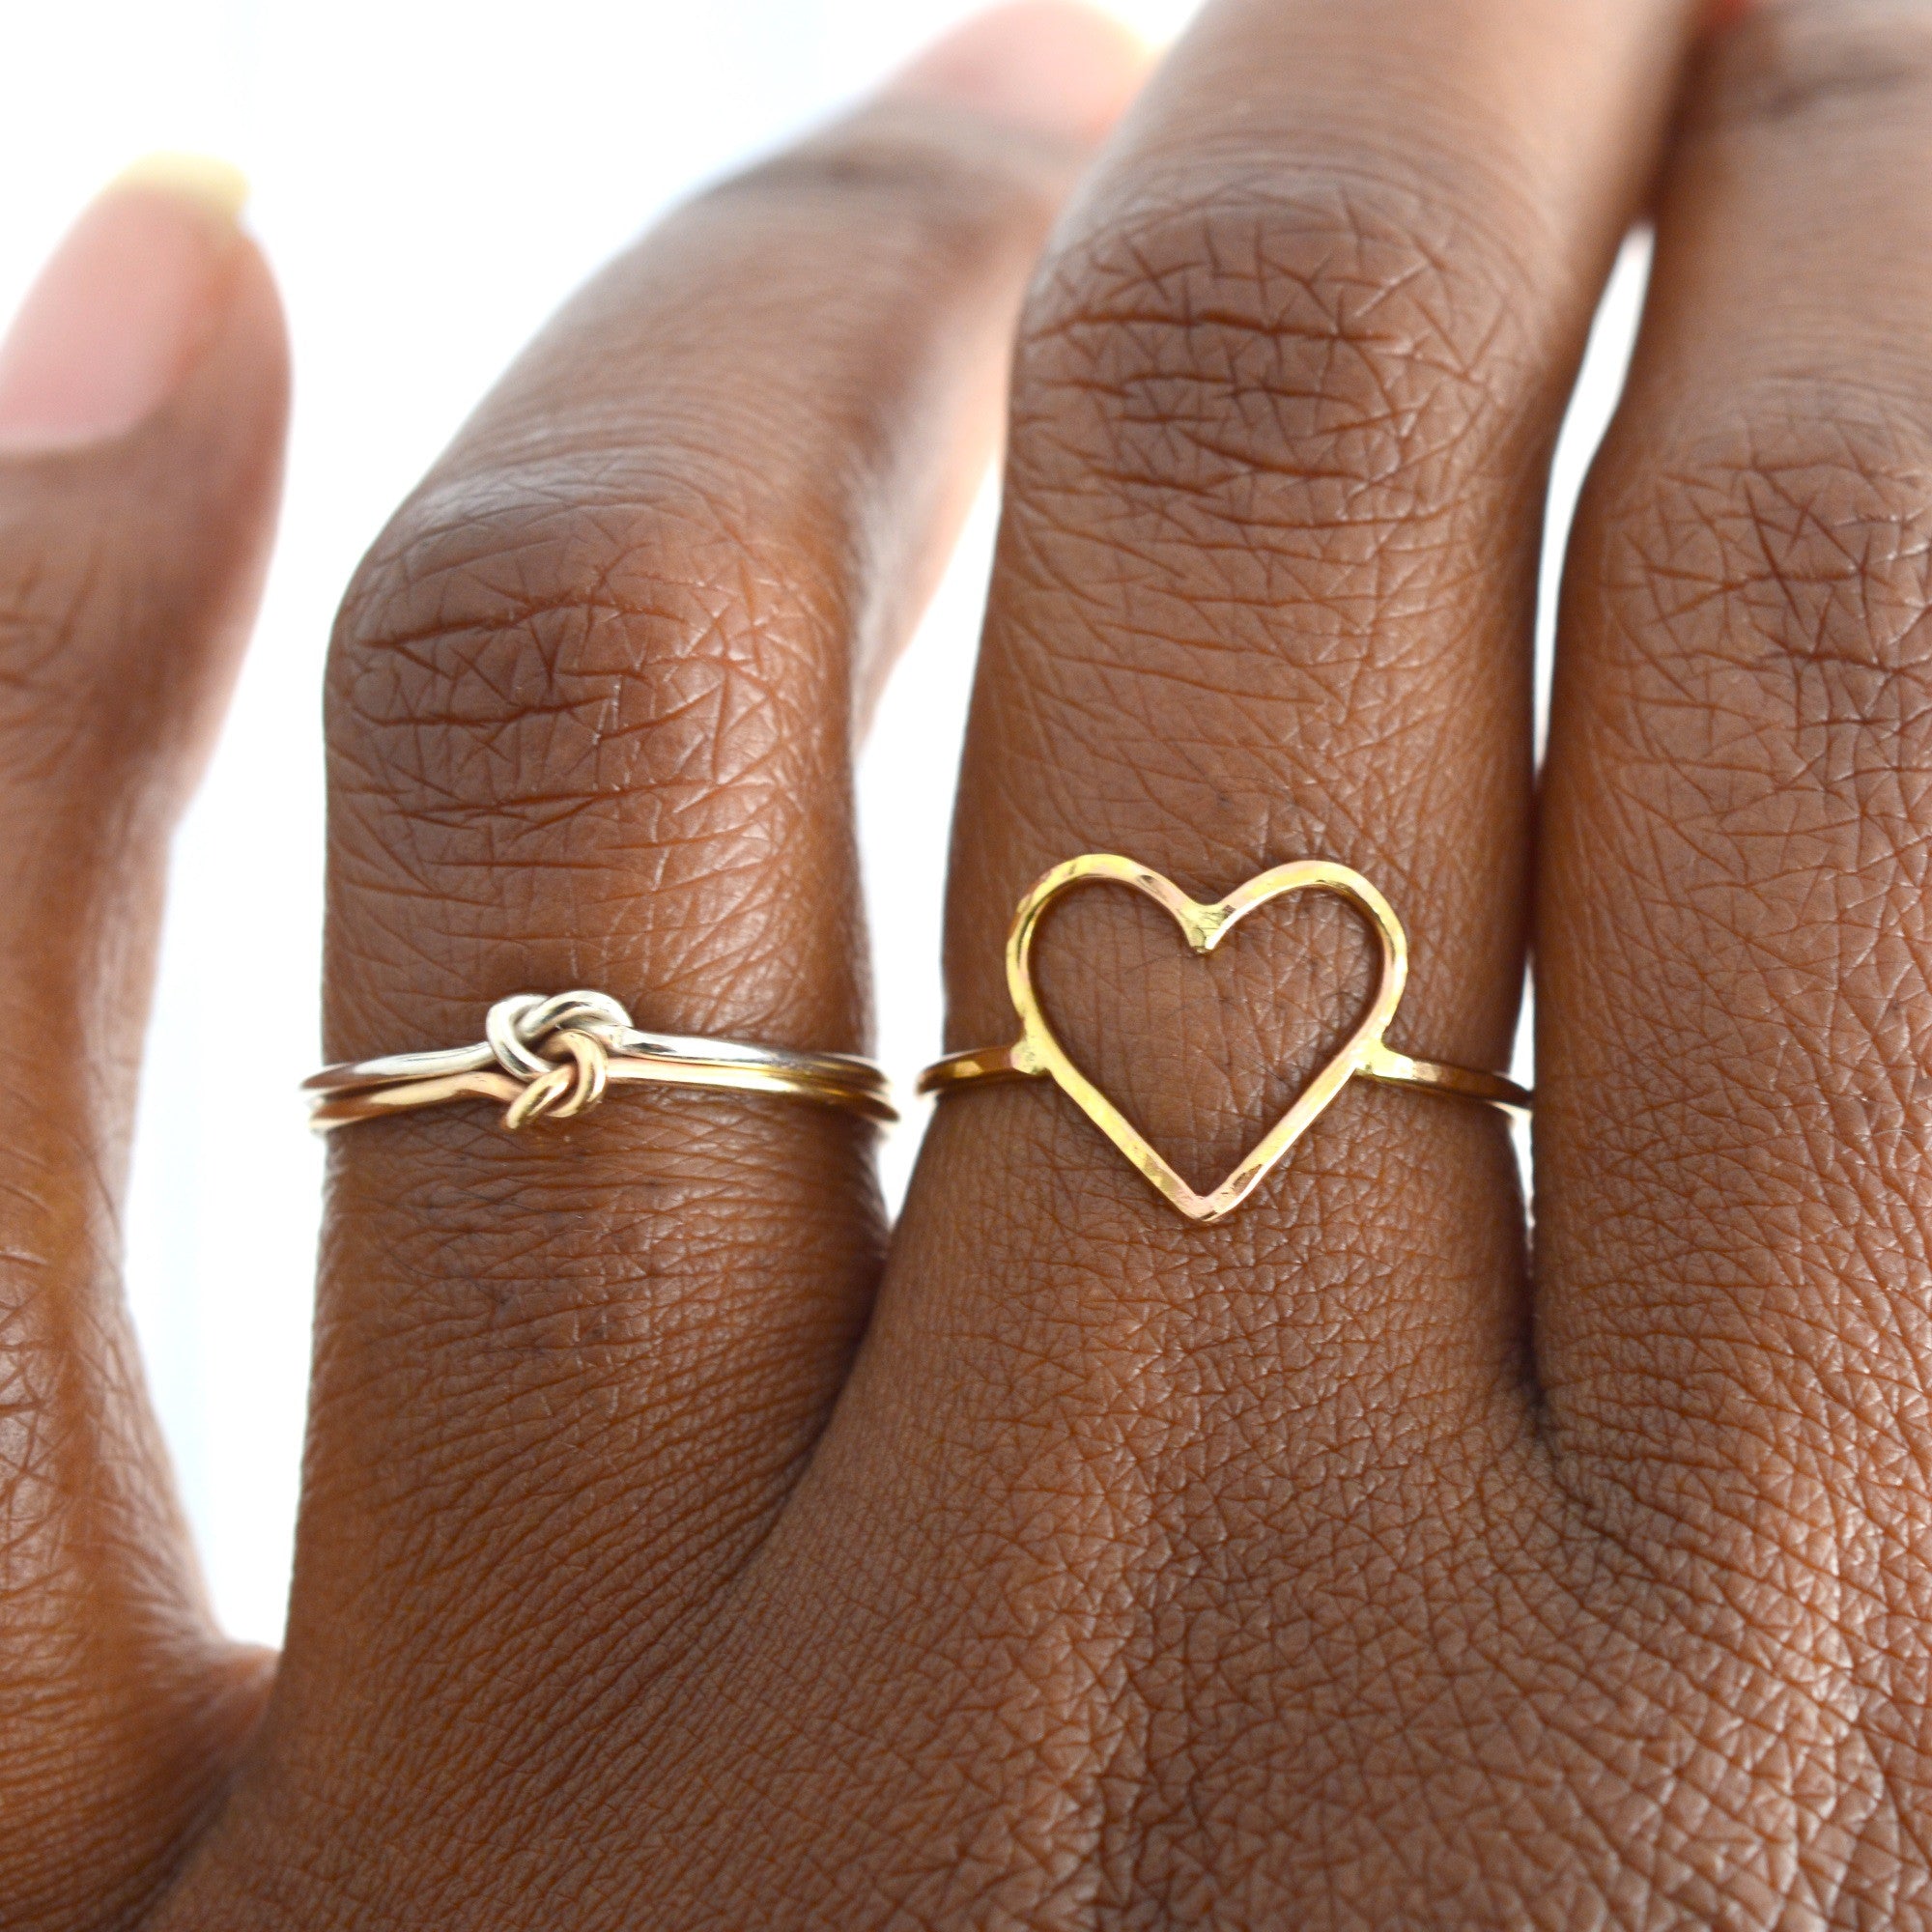 Handmade Solid Gold Heart Ring By Alison Moore Designs |  notonthehighstreet.com